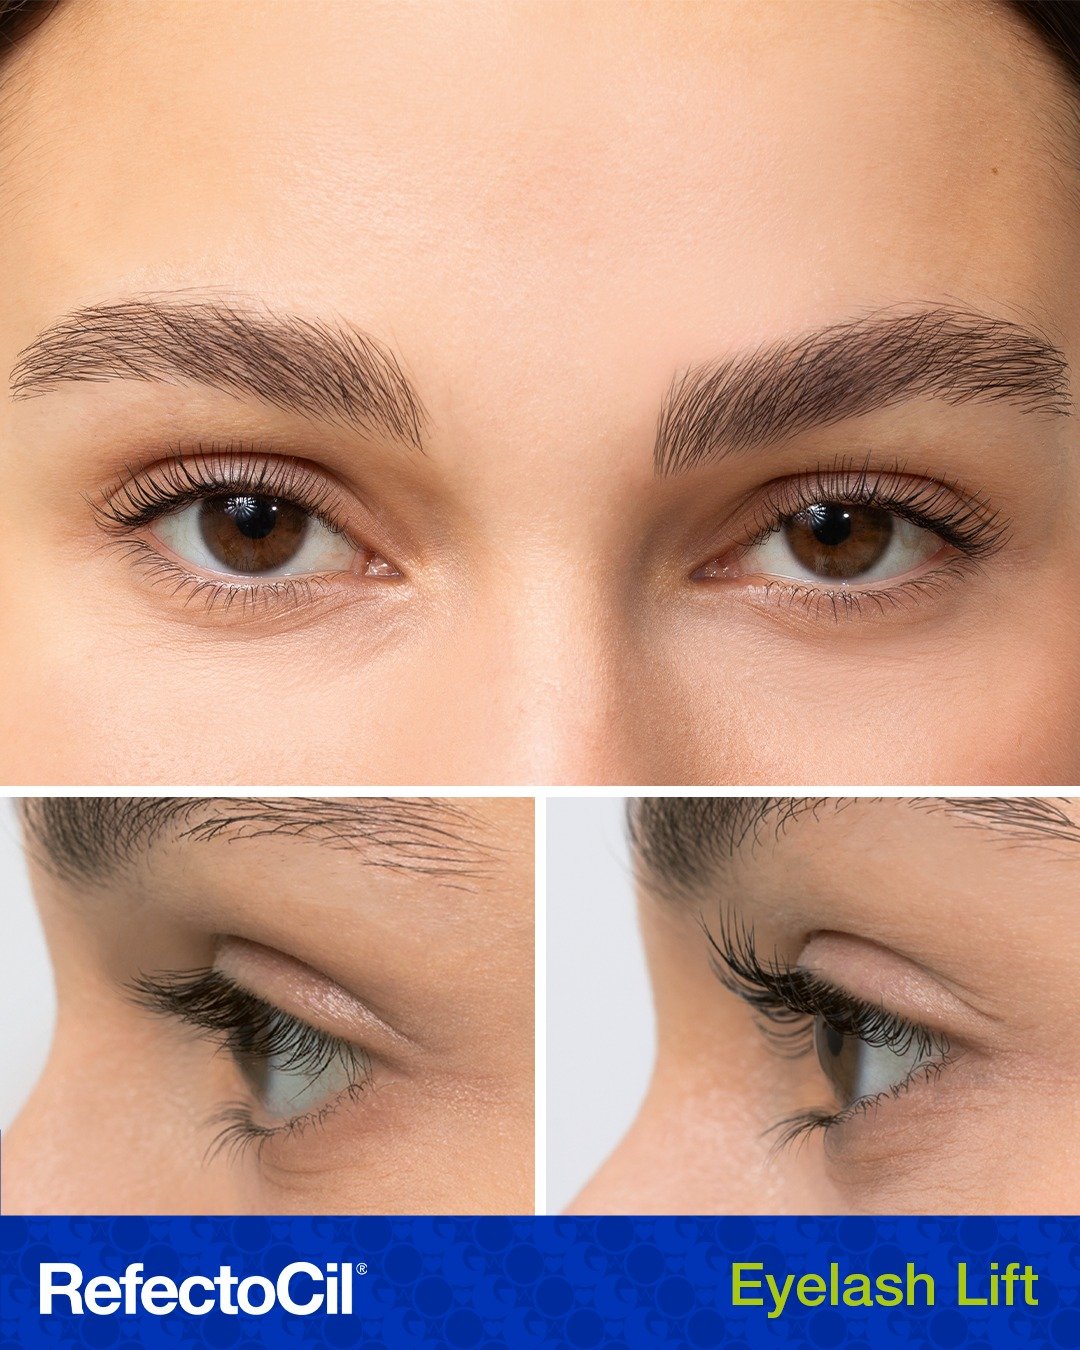 RefectoCil Eyelash Lift lifts lashes up in doing so, creates an intense, wide-eyed look, making your natural lashes look signiﬁcantly longer and thicker! What more could you want? Join our free webinar to find out our tips &amp; tricks for everything